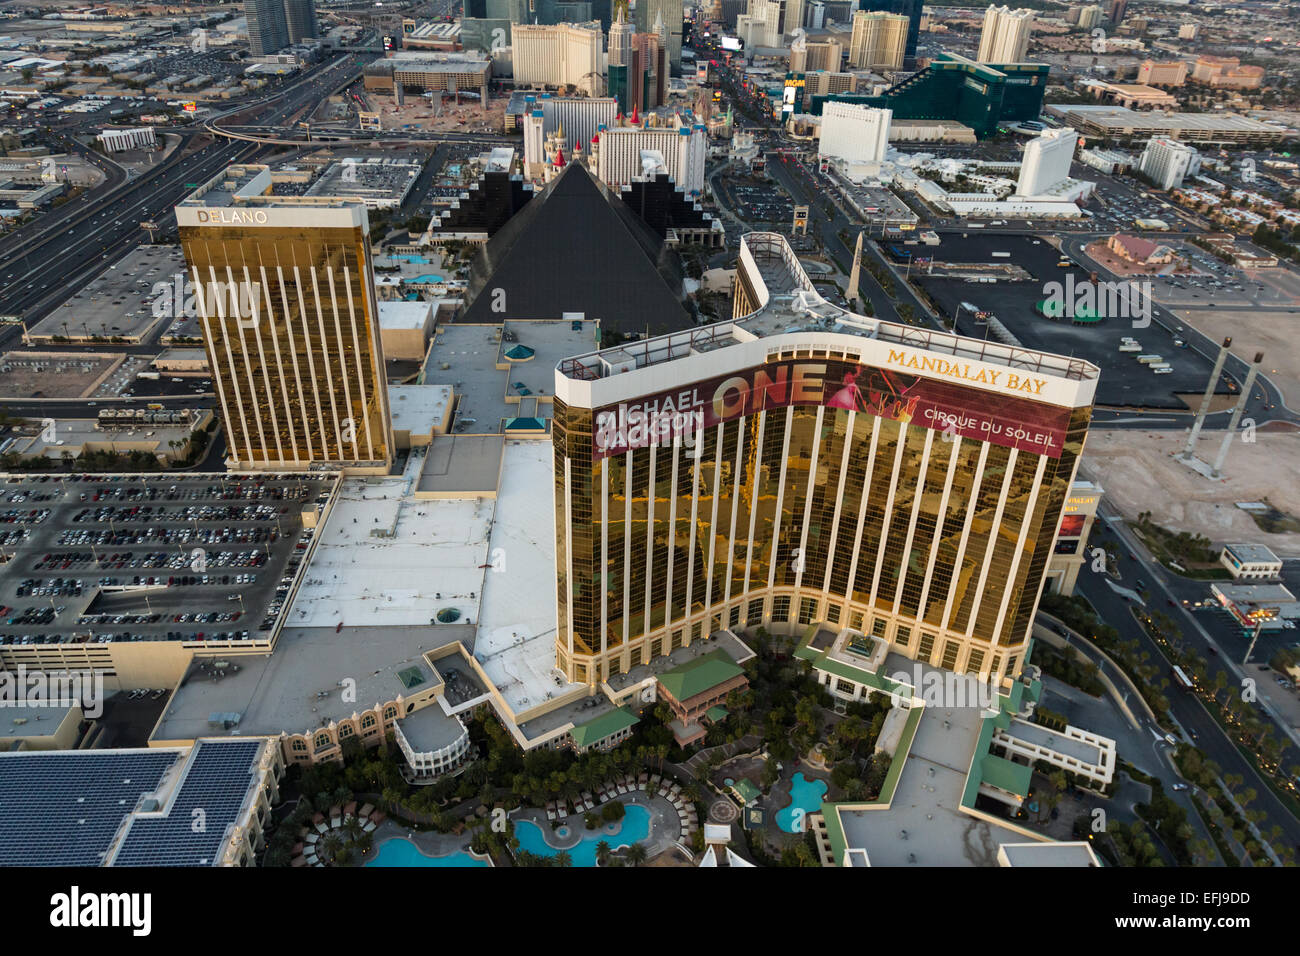 Las Vegas Nevada - December 14 : Aerial view of the famous Las Vegas Strip, view from the south end with Mandalay Bay in the fra Stock Photo